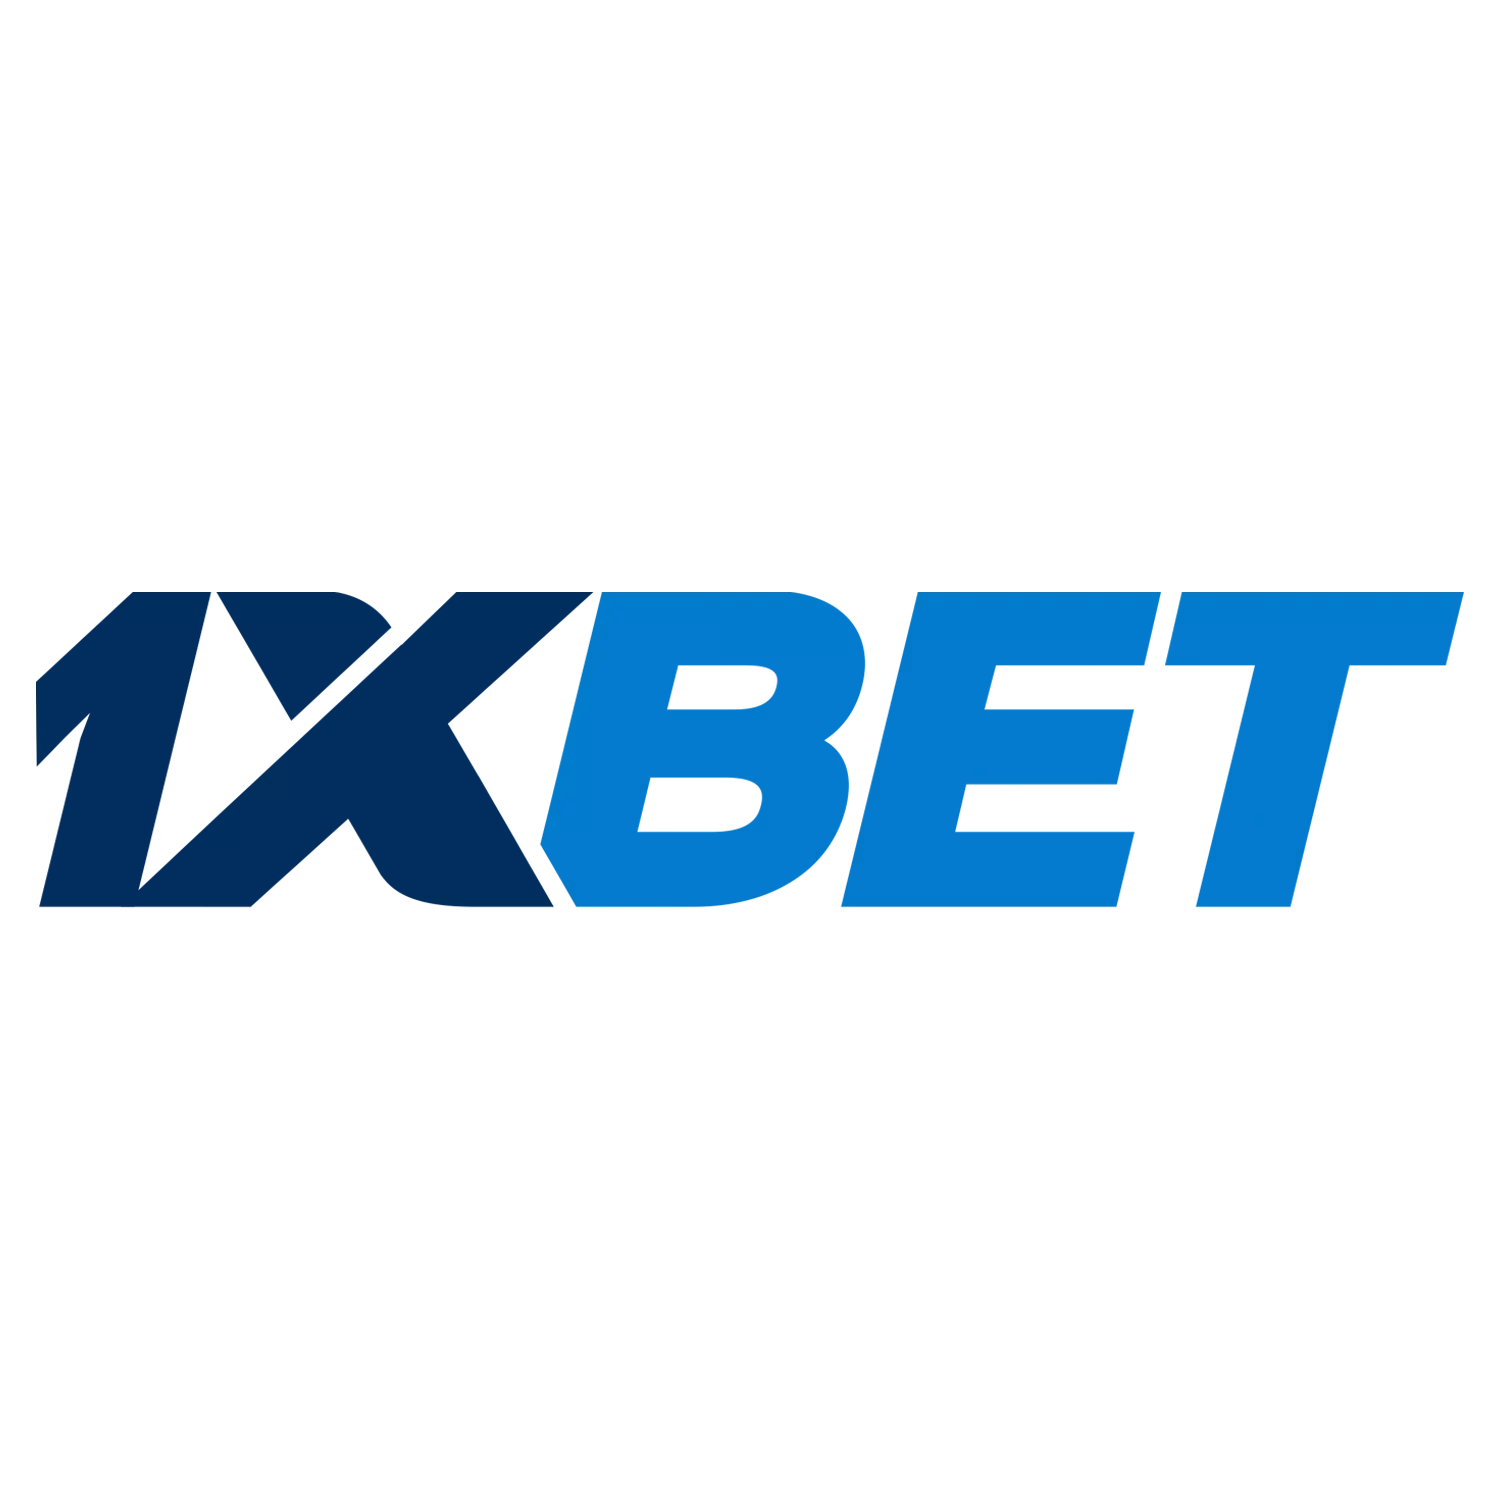 1xbet is huge and relaible bookmaker, that accept kabaddi bets.